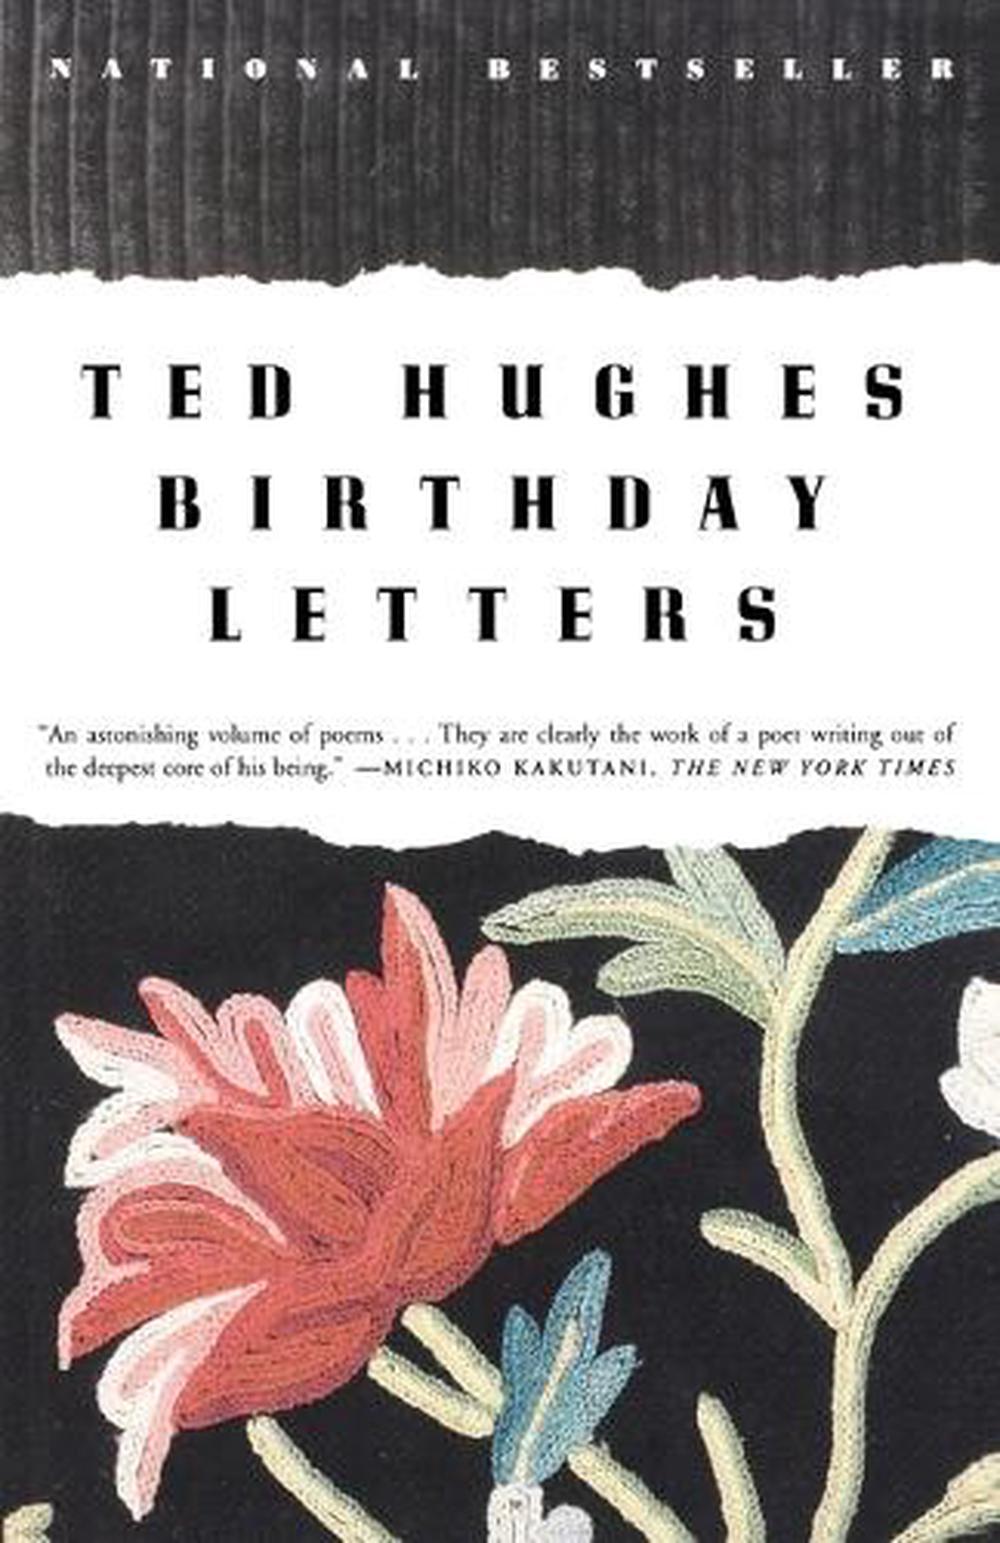 Birthday Letters by Ted Hughes, Paperback, 9780374525811 | Buy online at  The Nile